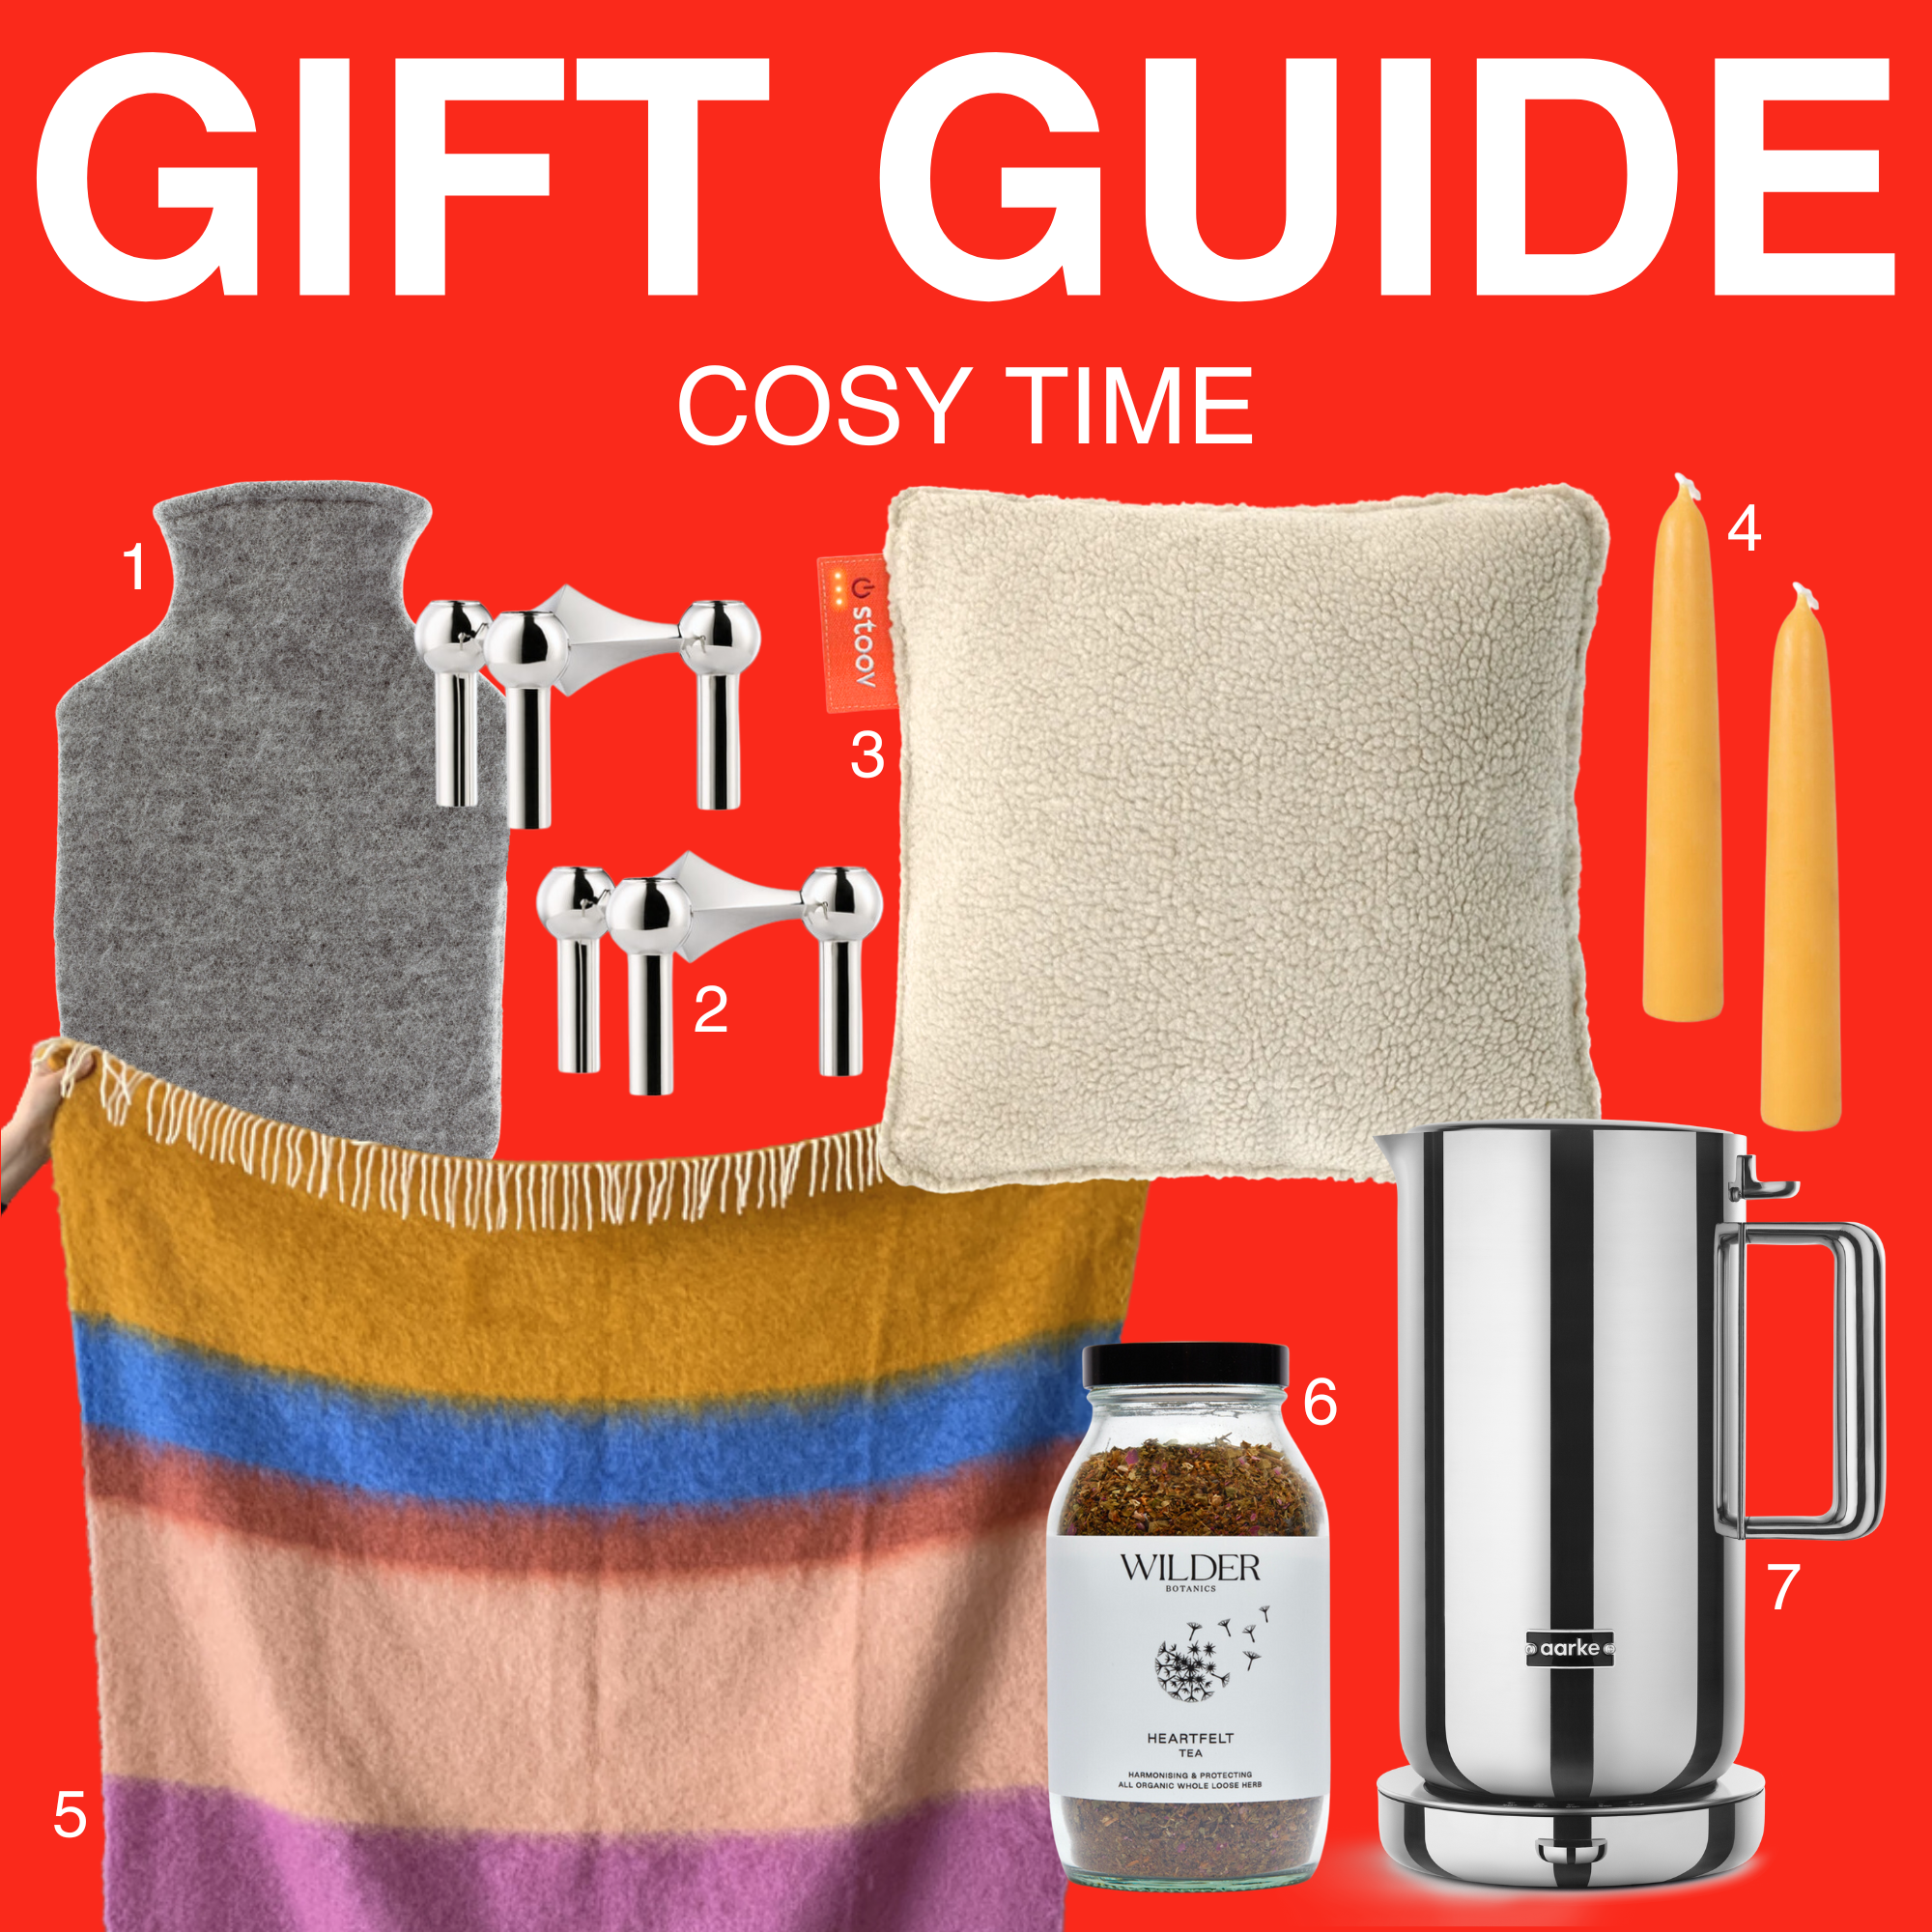 Gift Guide Cosy Time